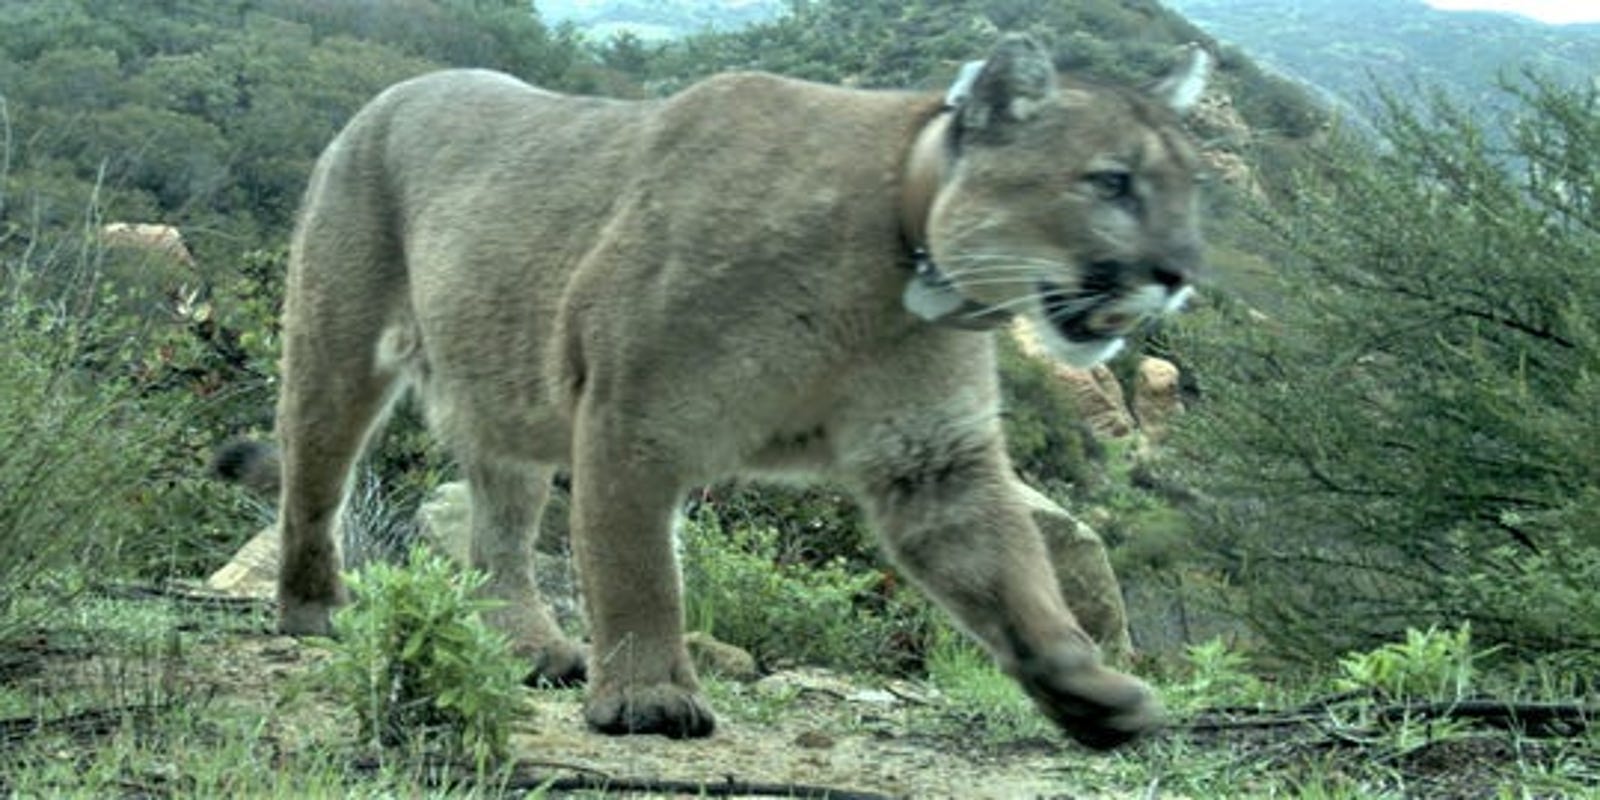 What we know about a mountain lion sighting in Moorpark